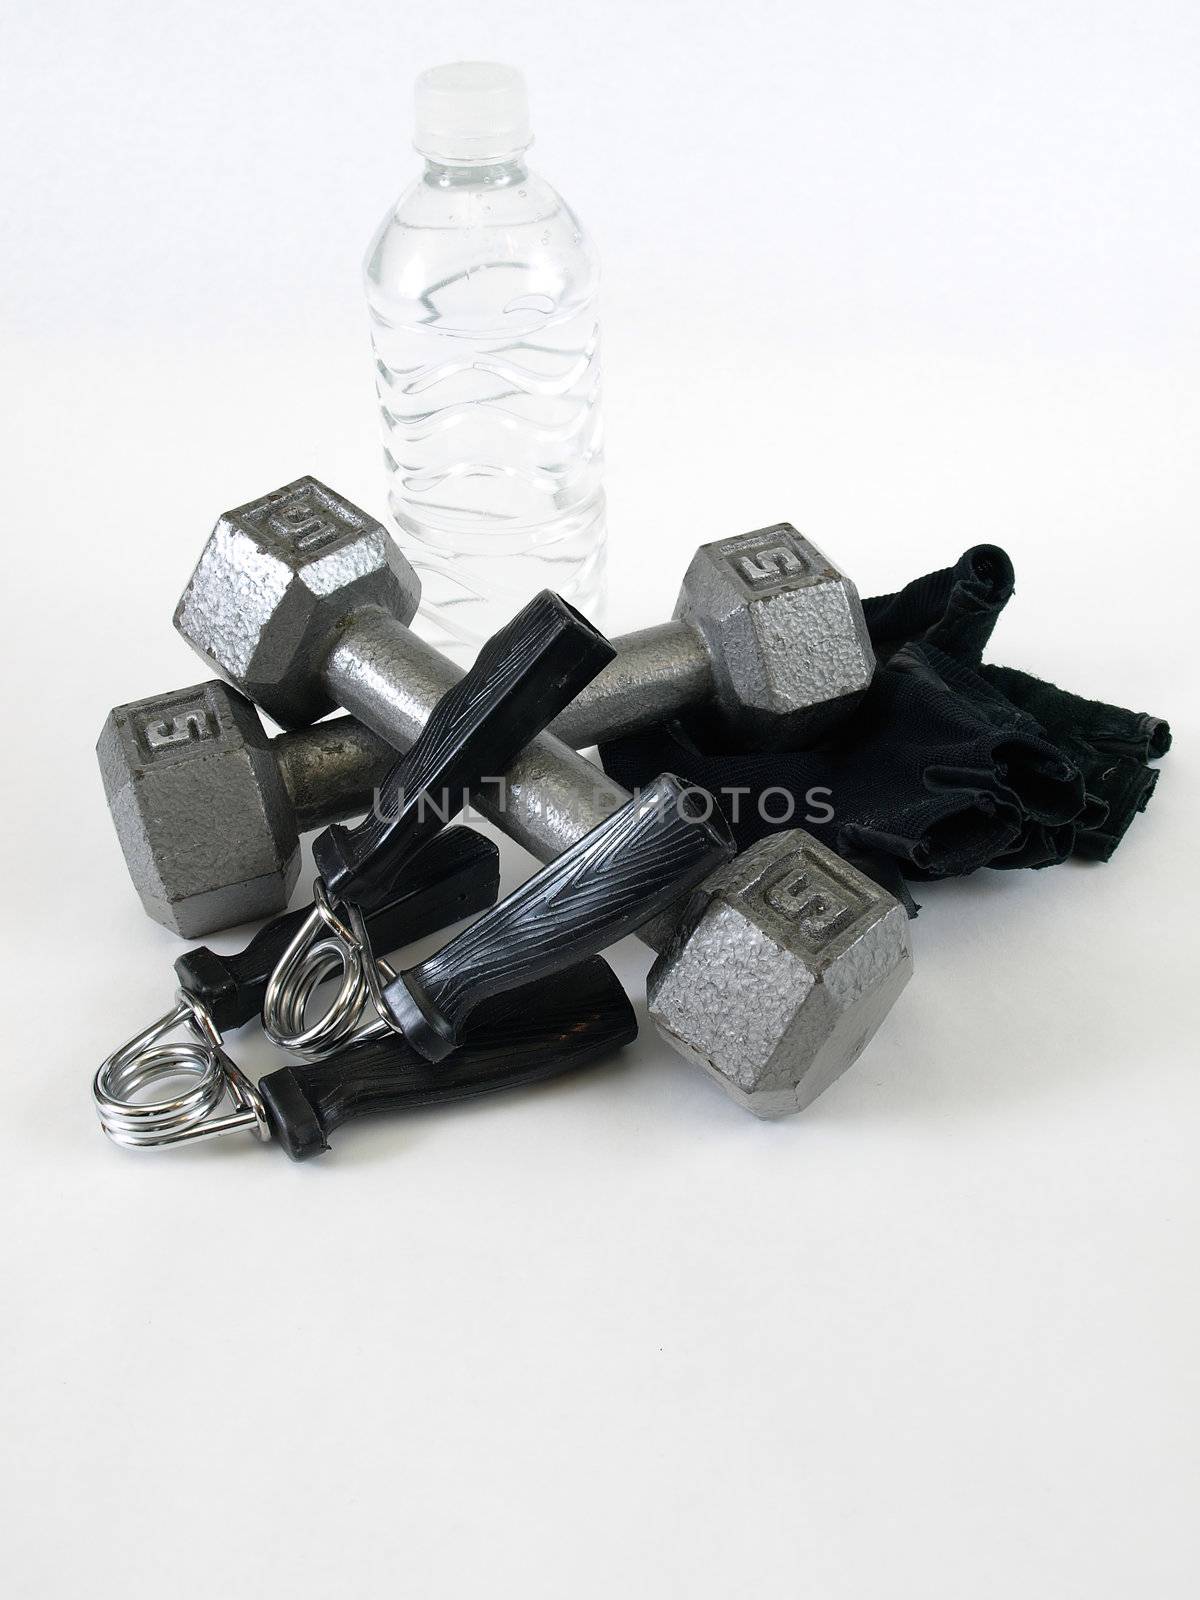 Five pound handweights, grip trainers, gloves and a water bottle, over a white background.